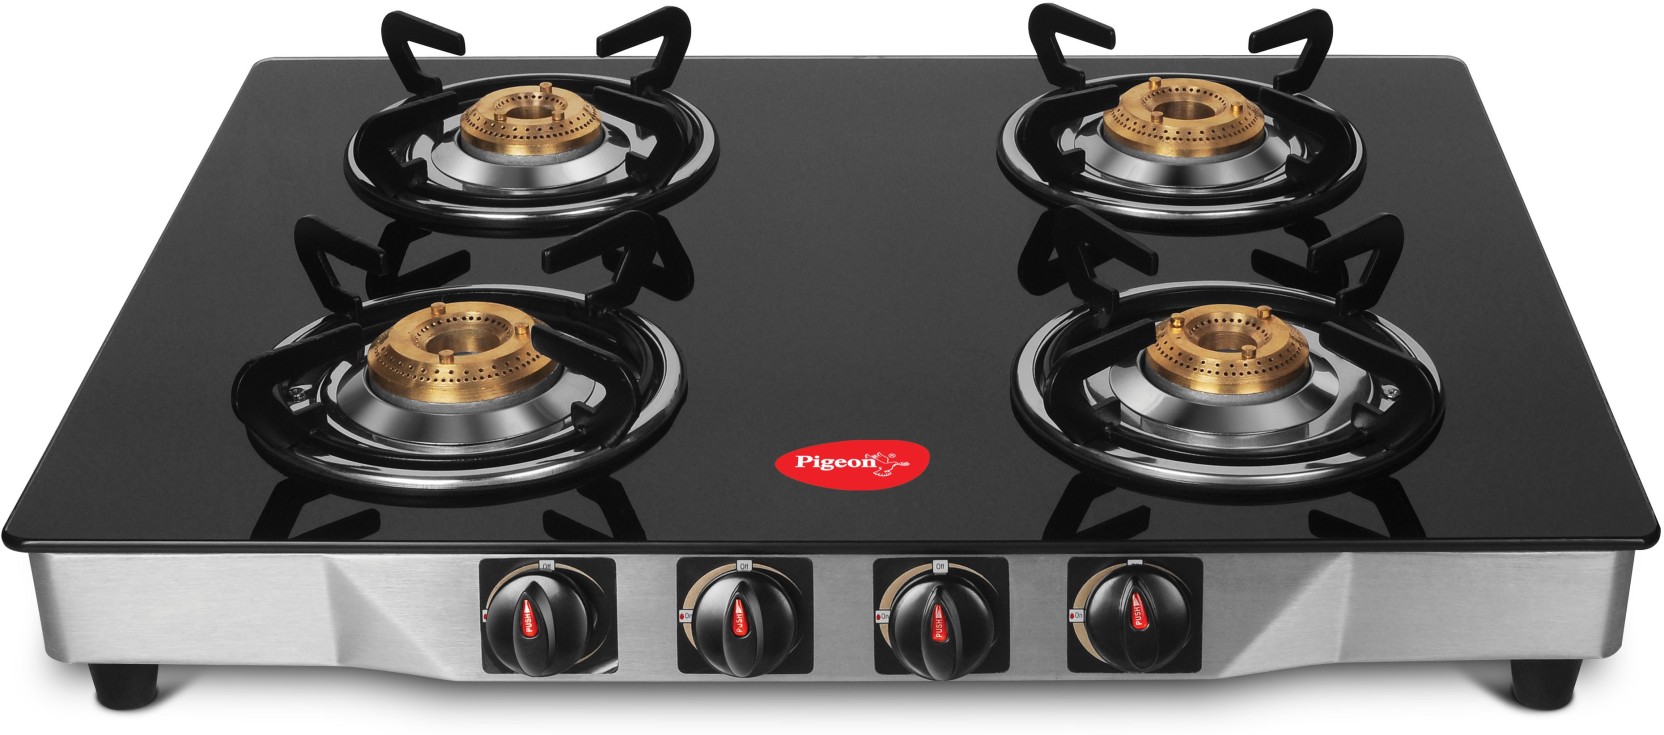 SURYAJYOTI GAS GALLERY, Gas Stove Dealers In Hadapsar, Gas Stove Shop In Hadapsar, Gas Stove Supplier In Hadapsar, Digital Gas Stove Dealers In Hadapsar, Gas Burner In Hadapsar, Gas Chulha In Hadapsar, Best, Gas, Stove, Shop